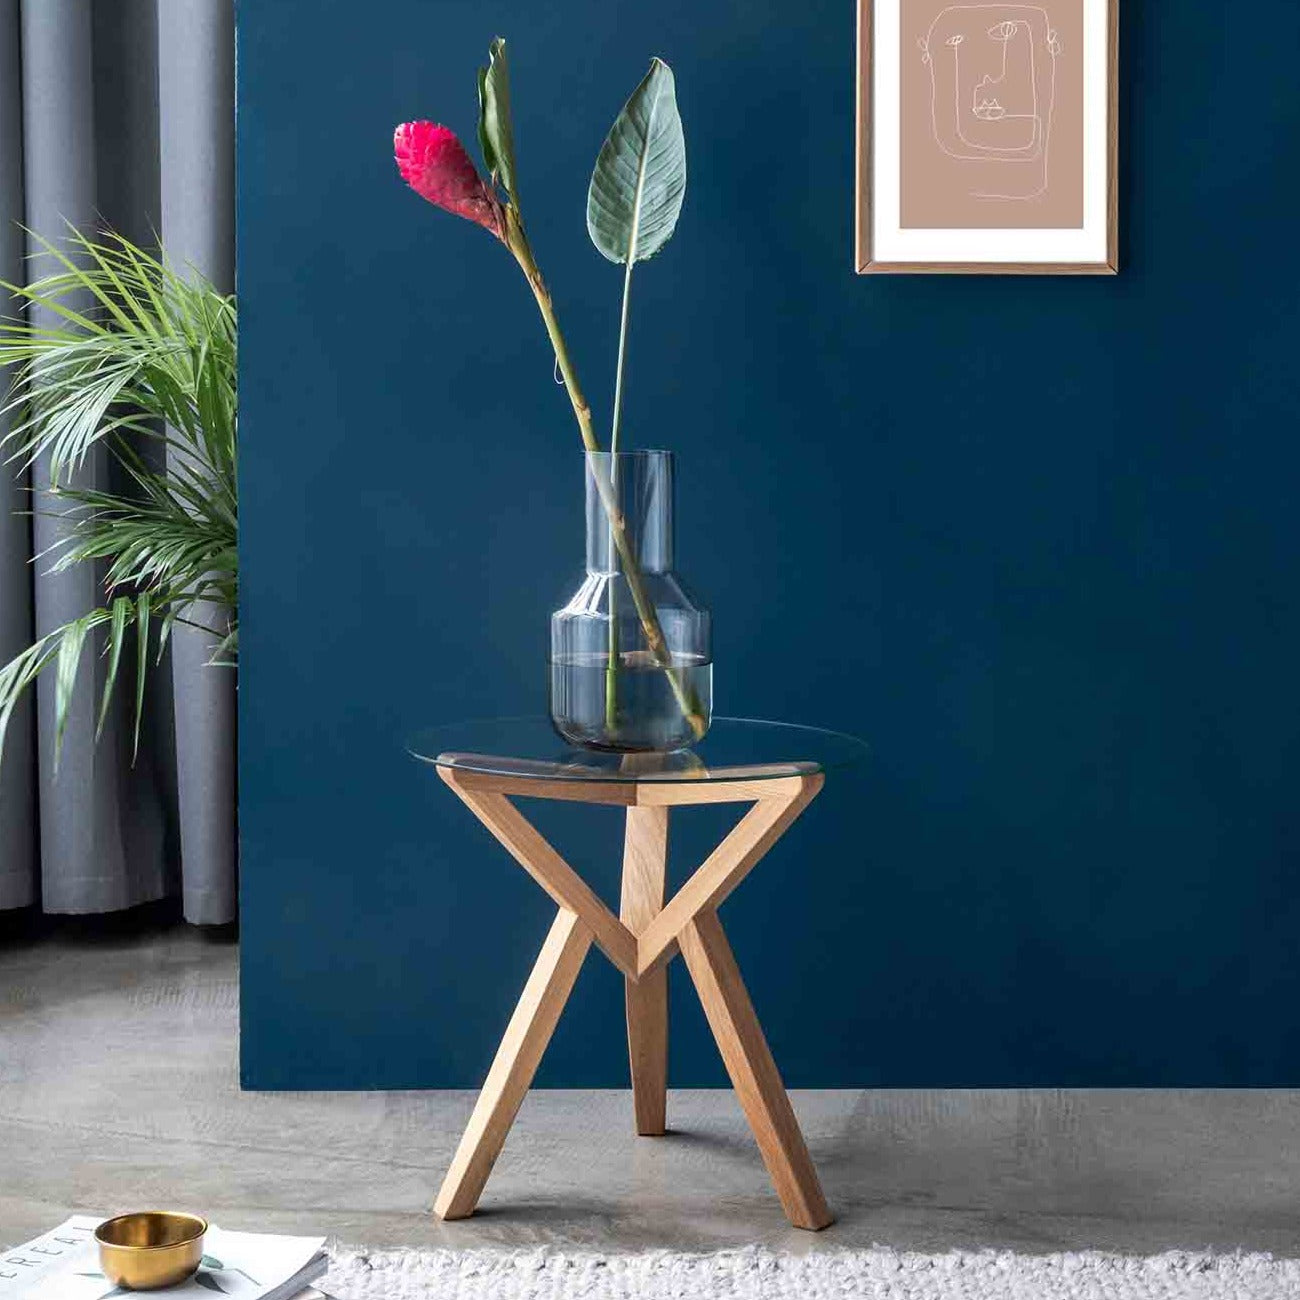 Side Table, Oak Wood Frame, Natural Colour interior view with flower and vase